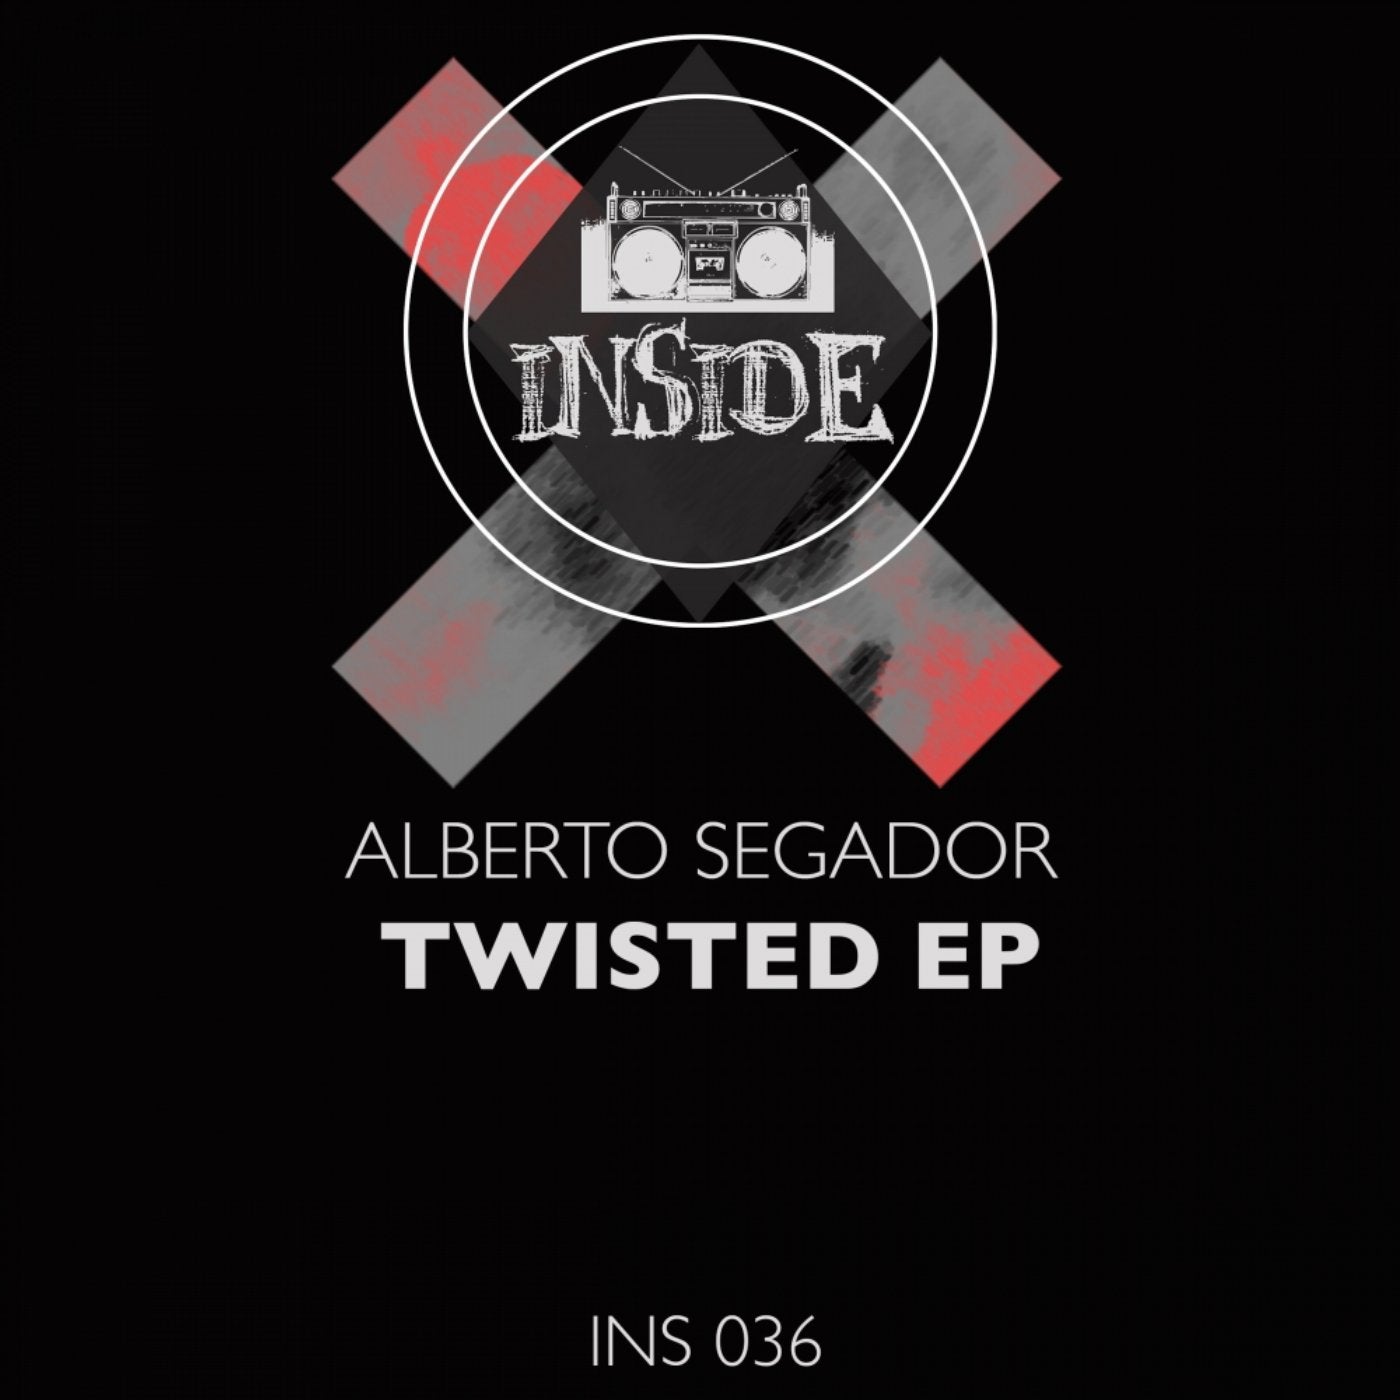 Twisted EP